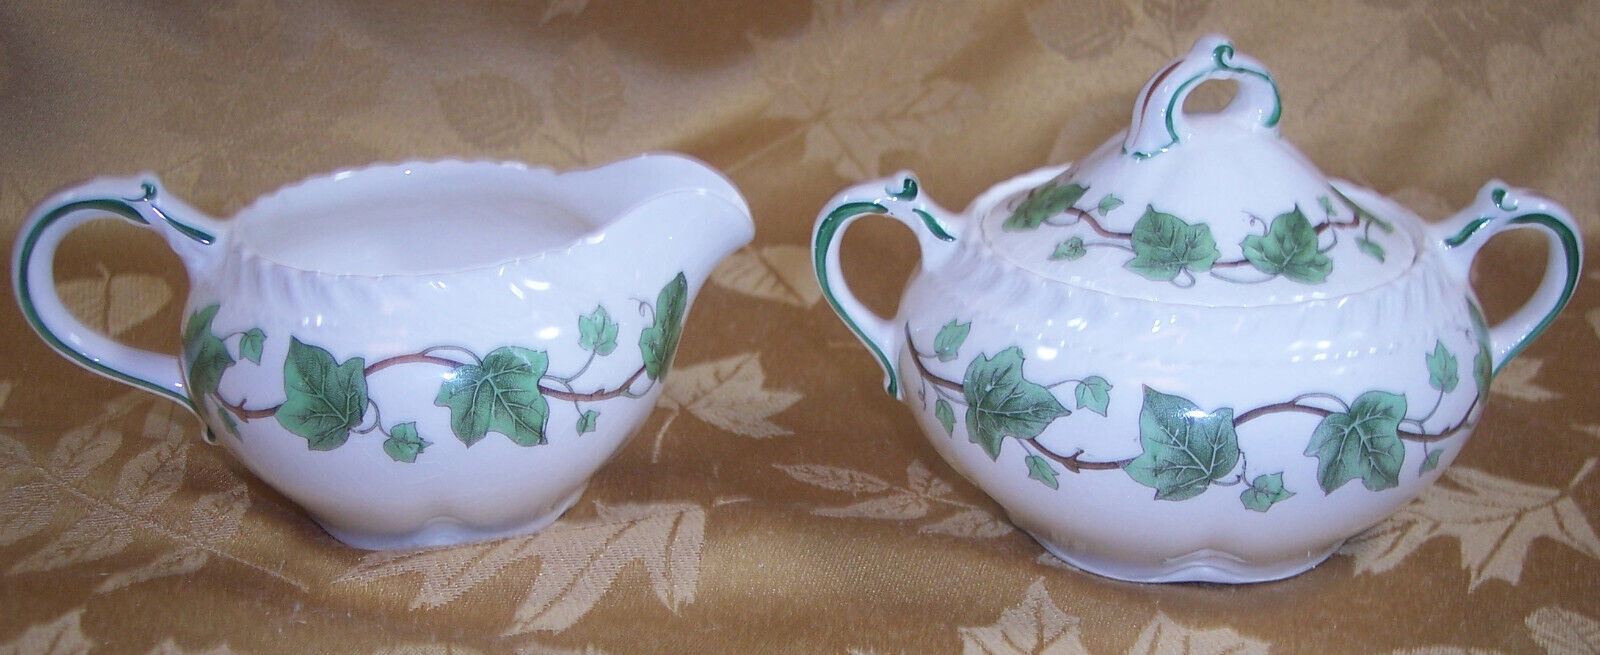 IVY By Harker Creamer & Sugar Bowl with Lid Rare USA Fine China c. 1940\'s Superb